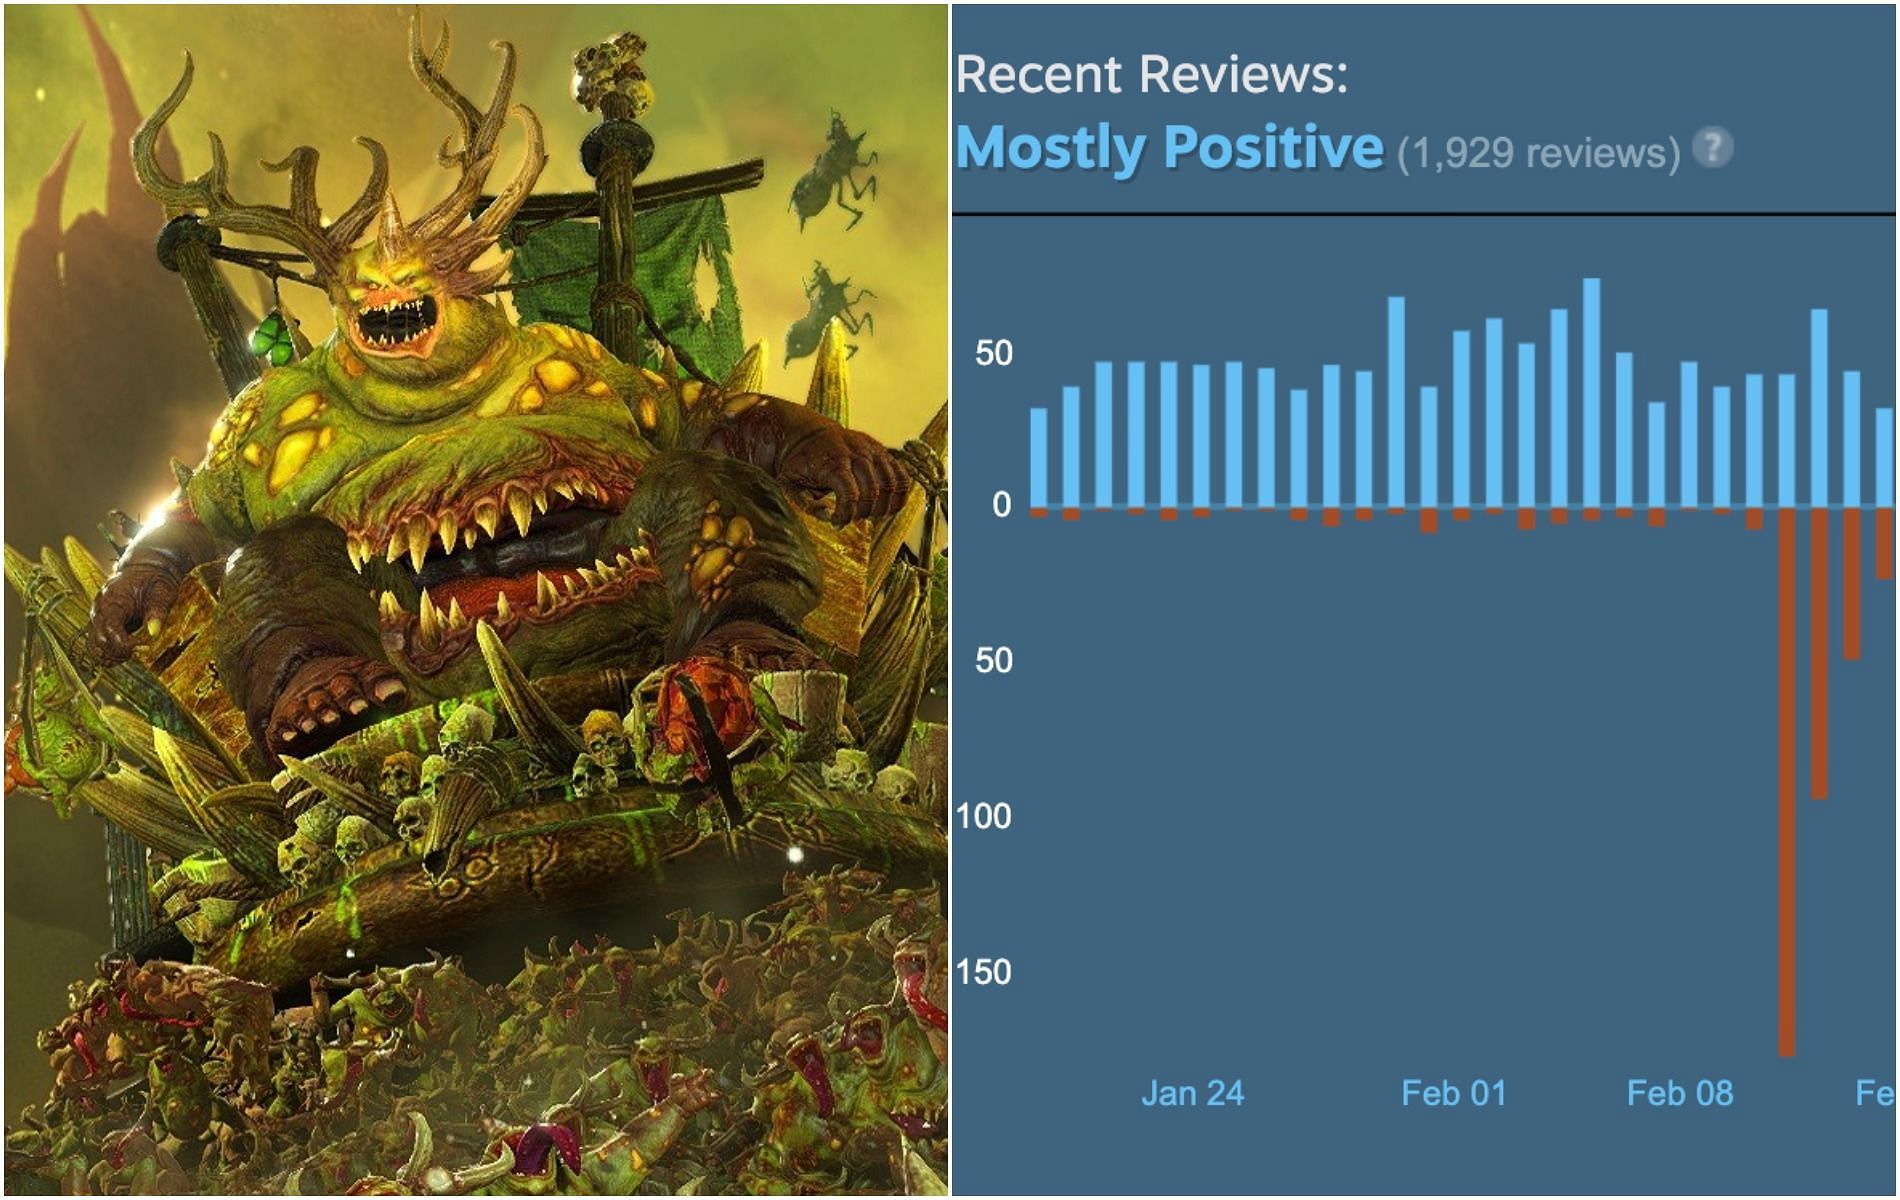 Chinese players review bomb Total War: Warhammer III (Image via Total War: Warhammer III and Daniel Ahmad)